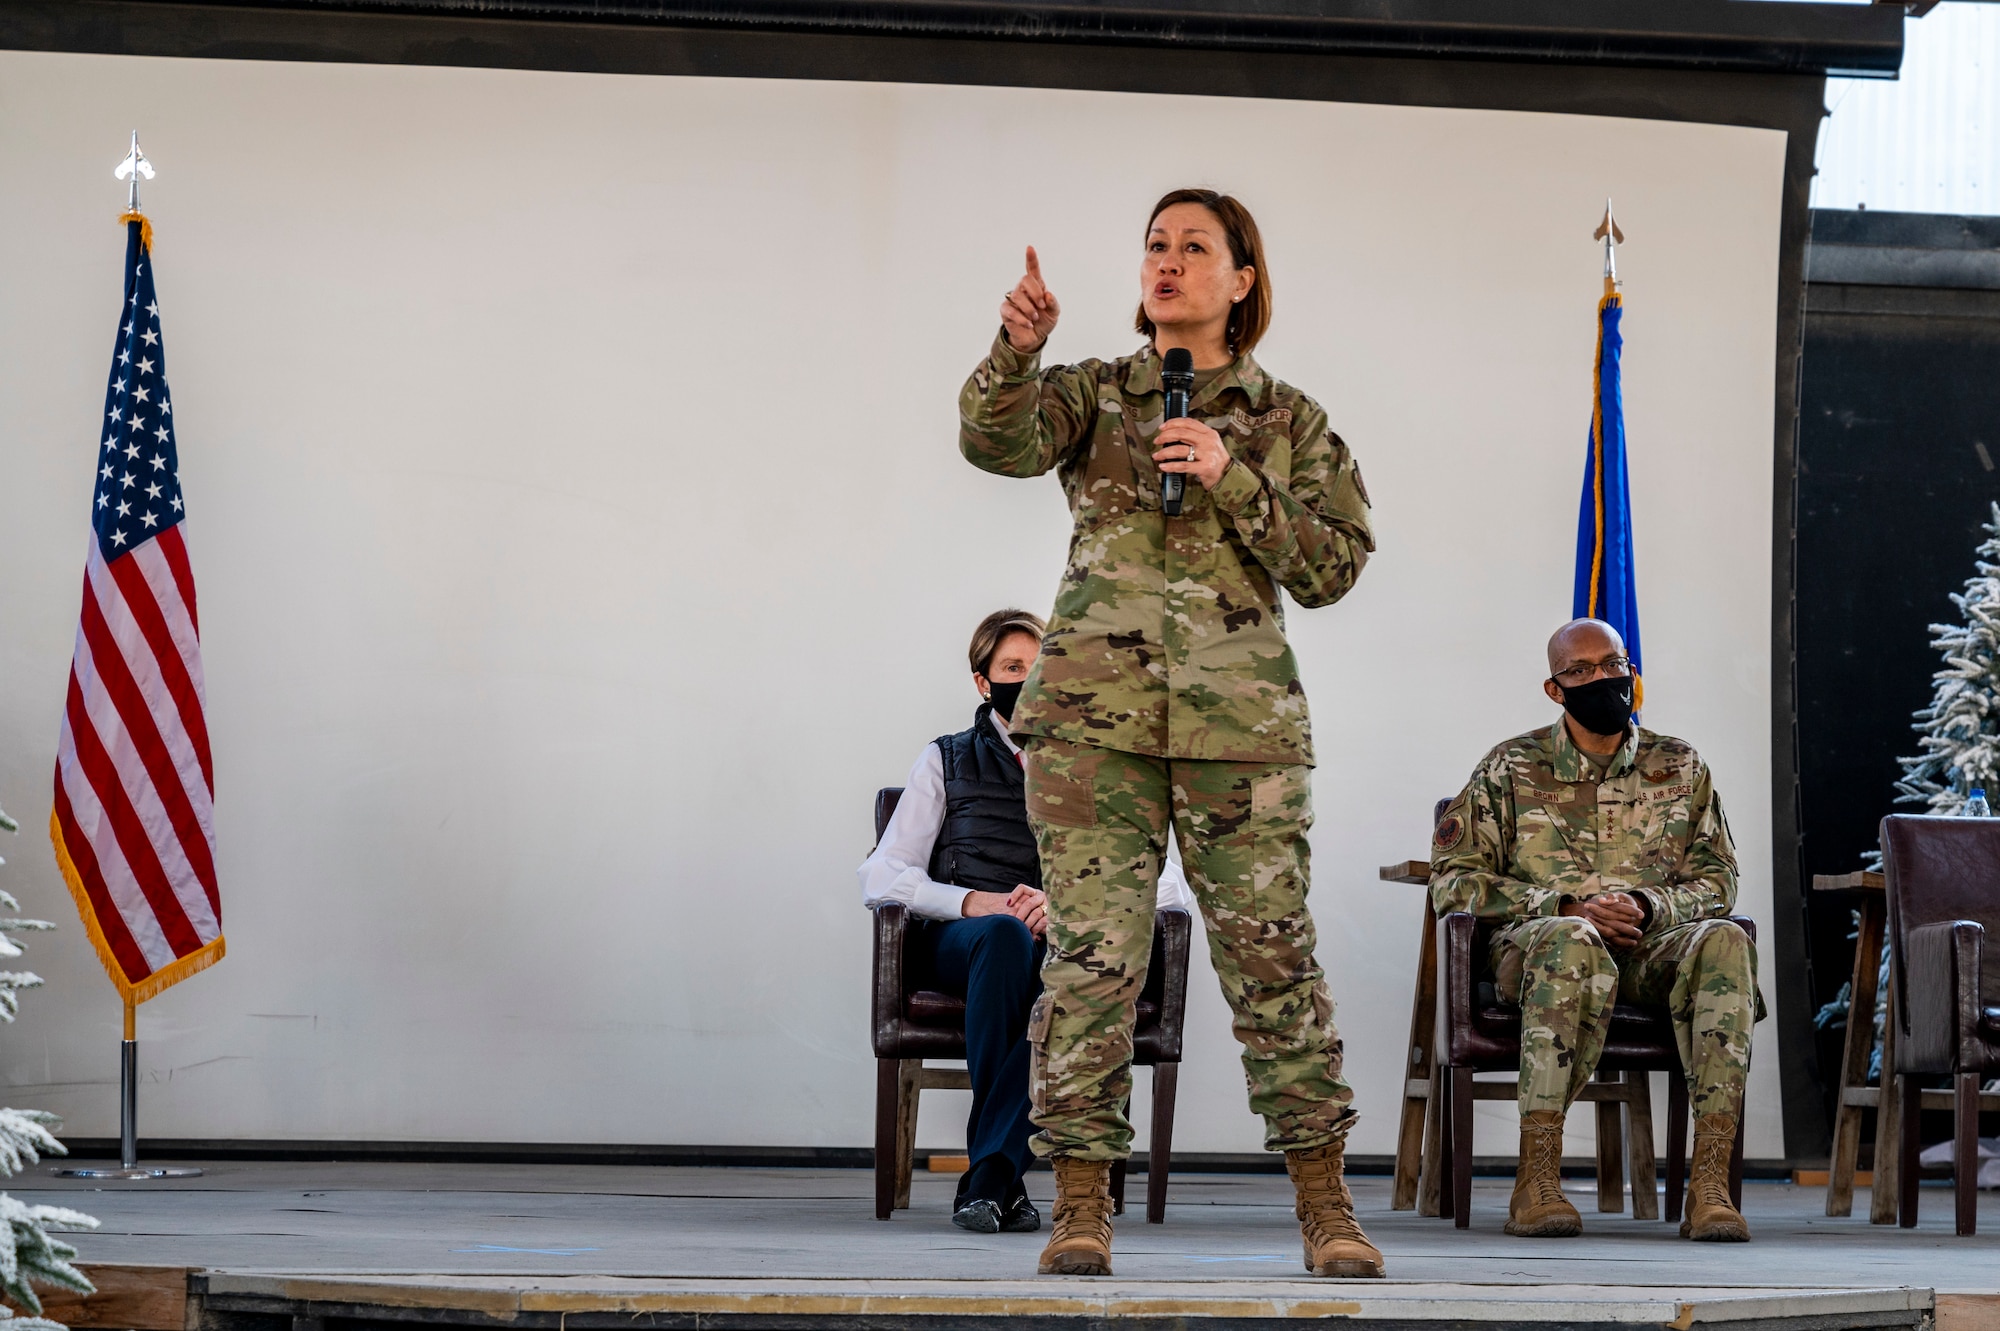 Chief Master Sgt. of the Air Force JoAnne S. Bass addresses Airmen during an all call at Al Dhafra Air Base, United Arab Emirates, Dec. 21, 2020.